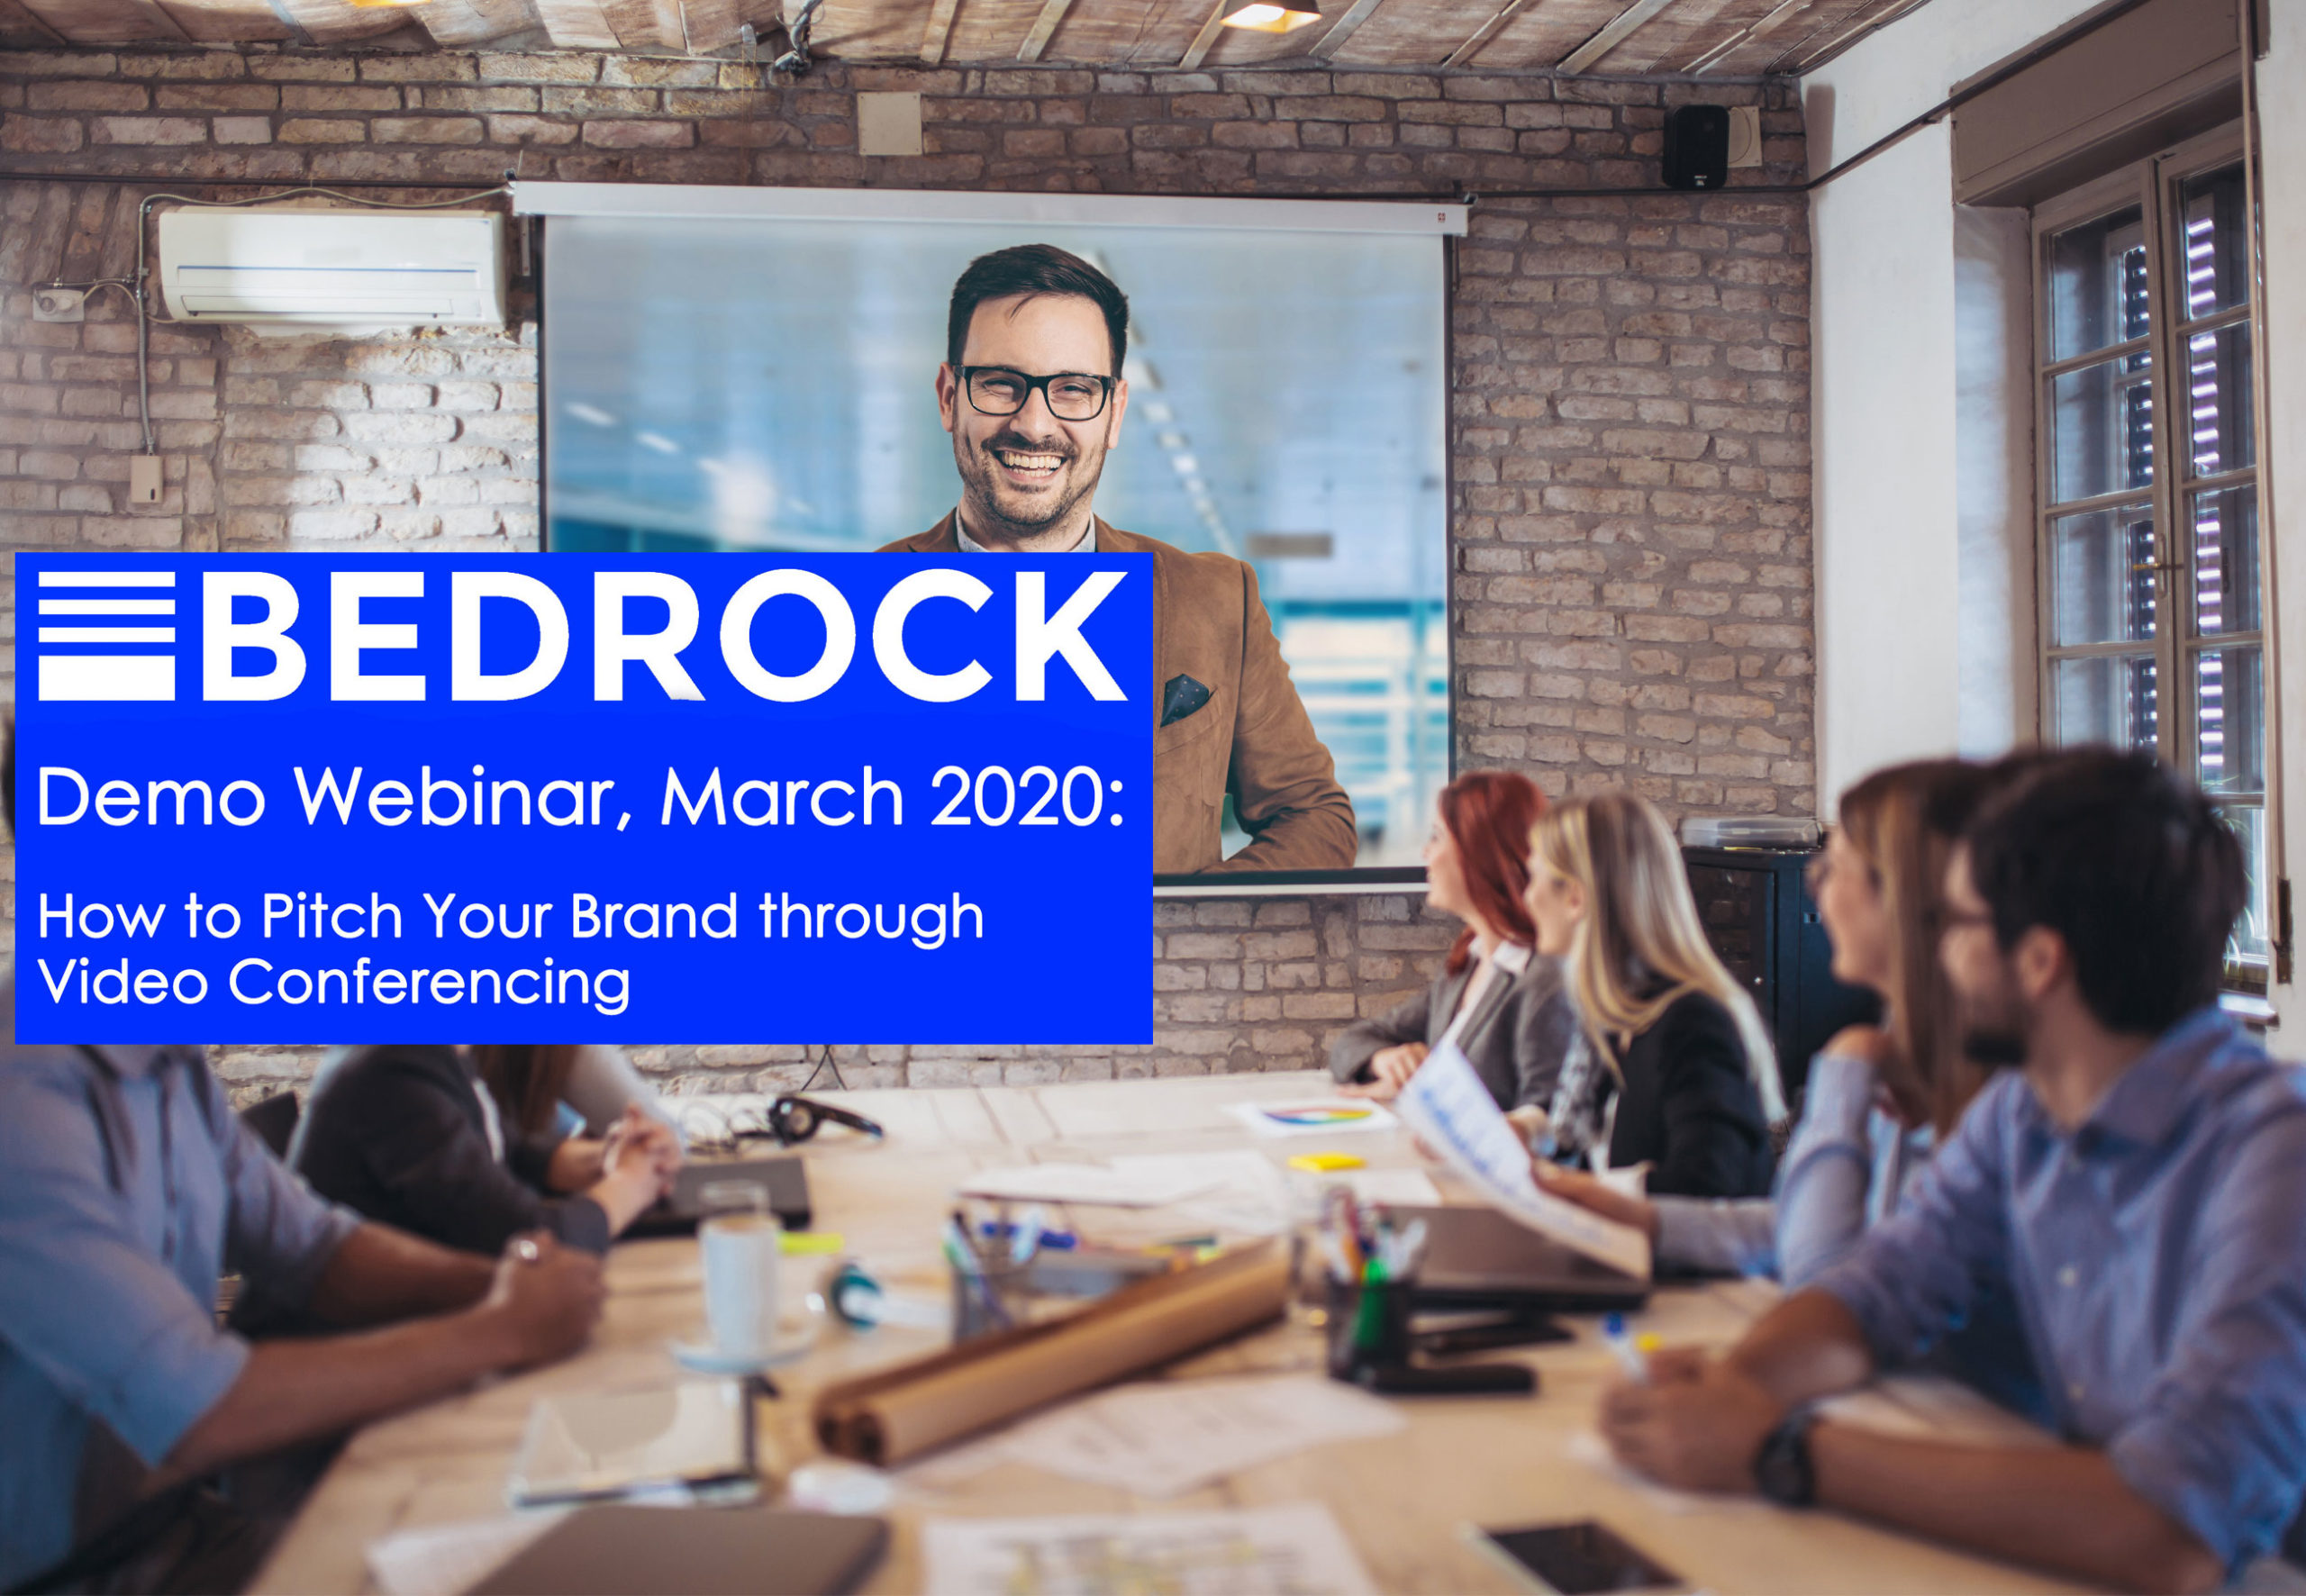 Selling Remotely is Becoming the New Normal for CPG Brands. In this webinar, Bedrock Founder & CEO Will Salcido explains how to engage your audience through a screen, and how to present data in a way that helps your brand shine.